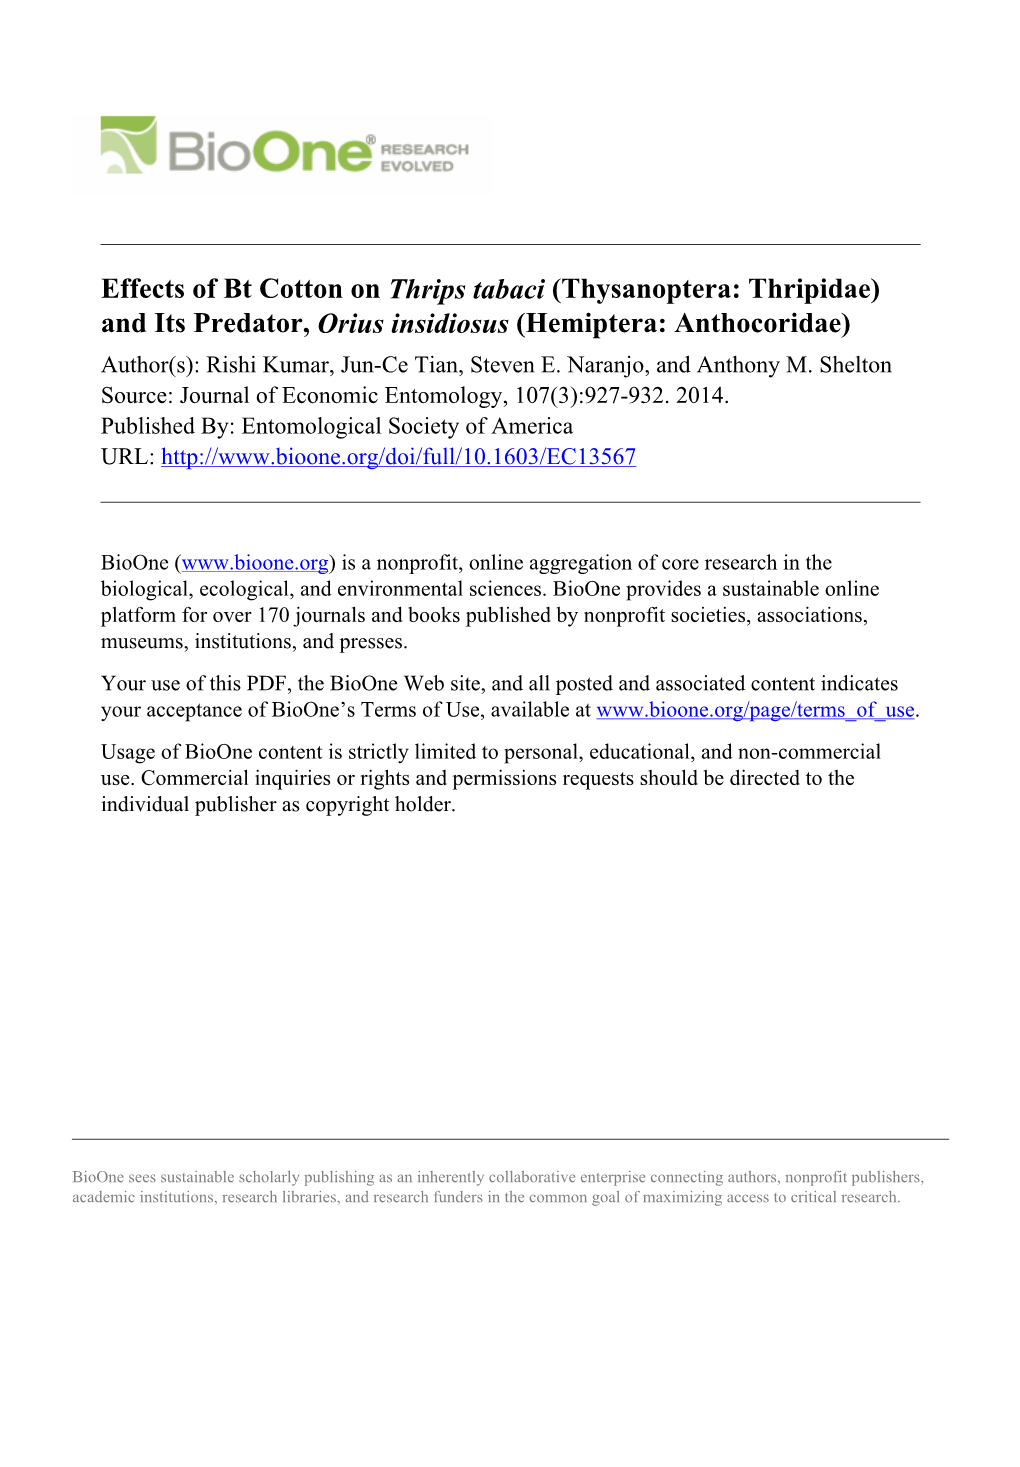 Effects of Bt Cotton on Thrips Tabaci (Thysanoptera: Thripidae)